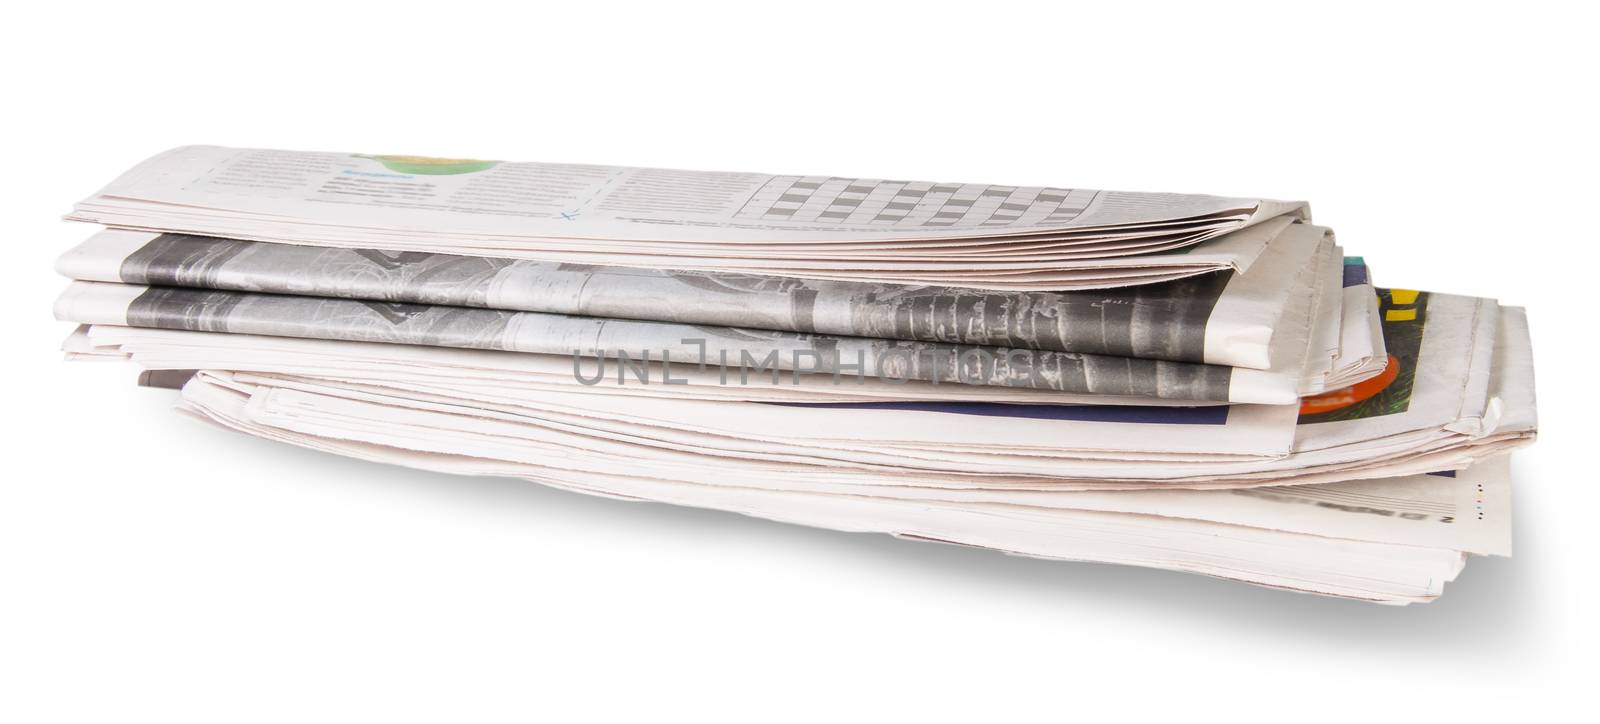 Rolled Of The Newspaper Isolated On White Background